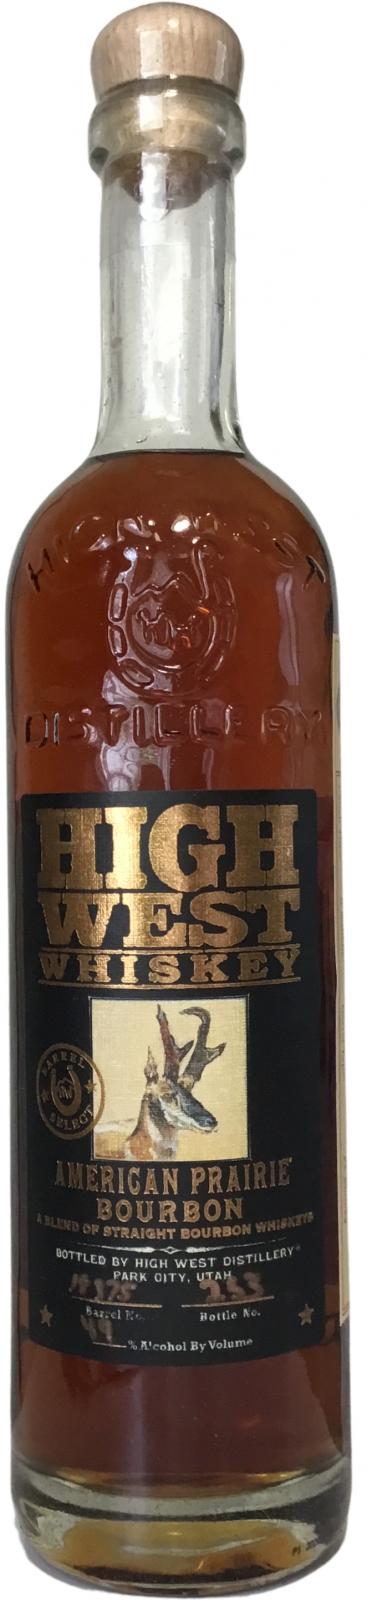 High West American Prairie Bourbon Finished in PX Sherry Cask #19175 Hi-Time Wine Cellars 49% 750ml